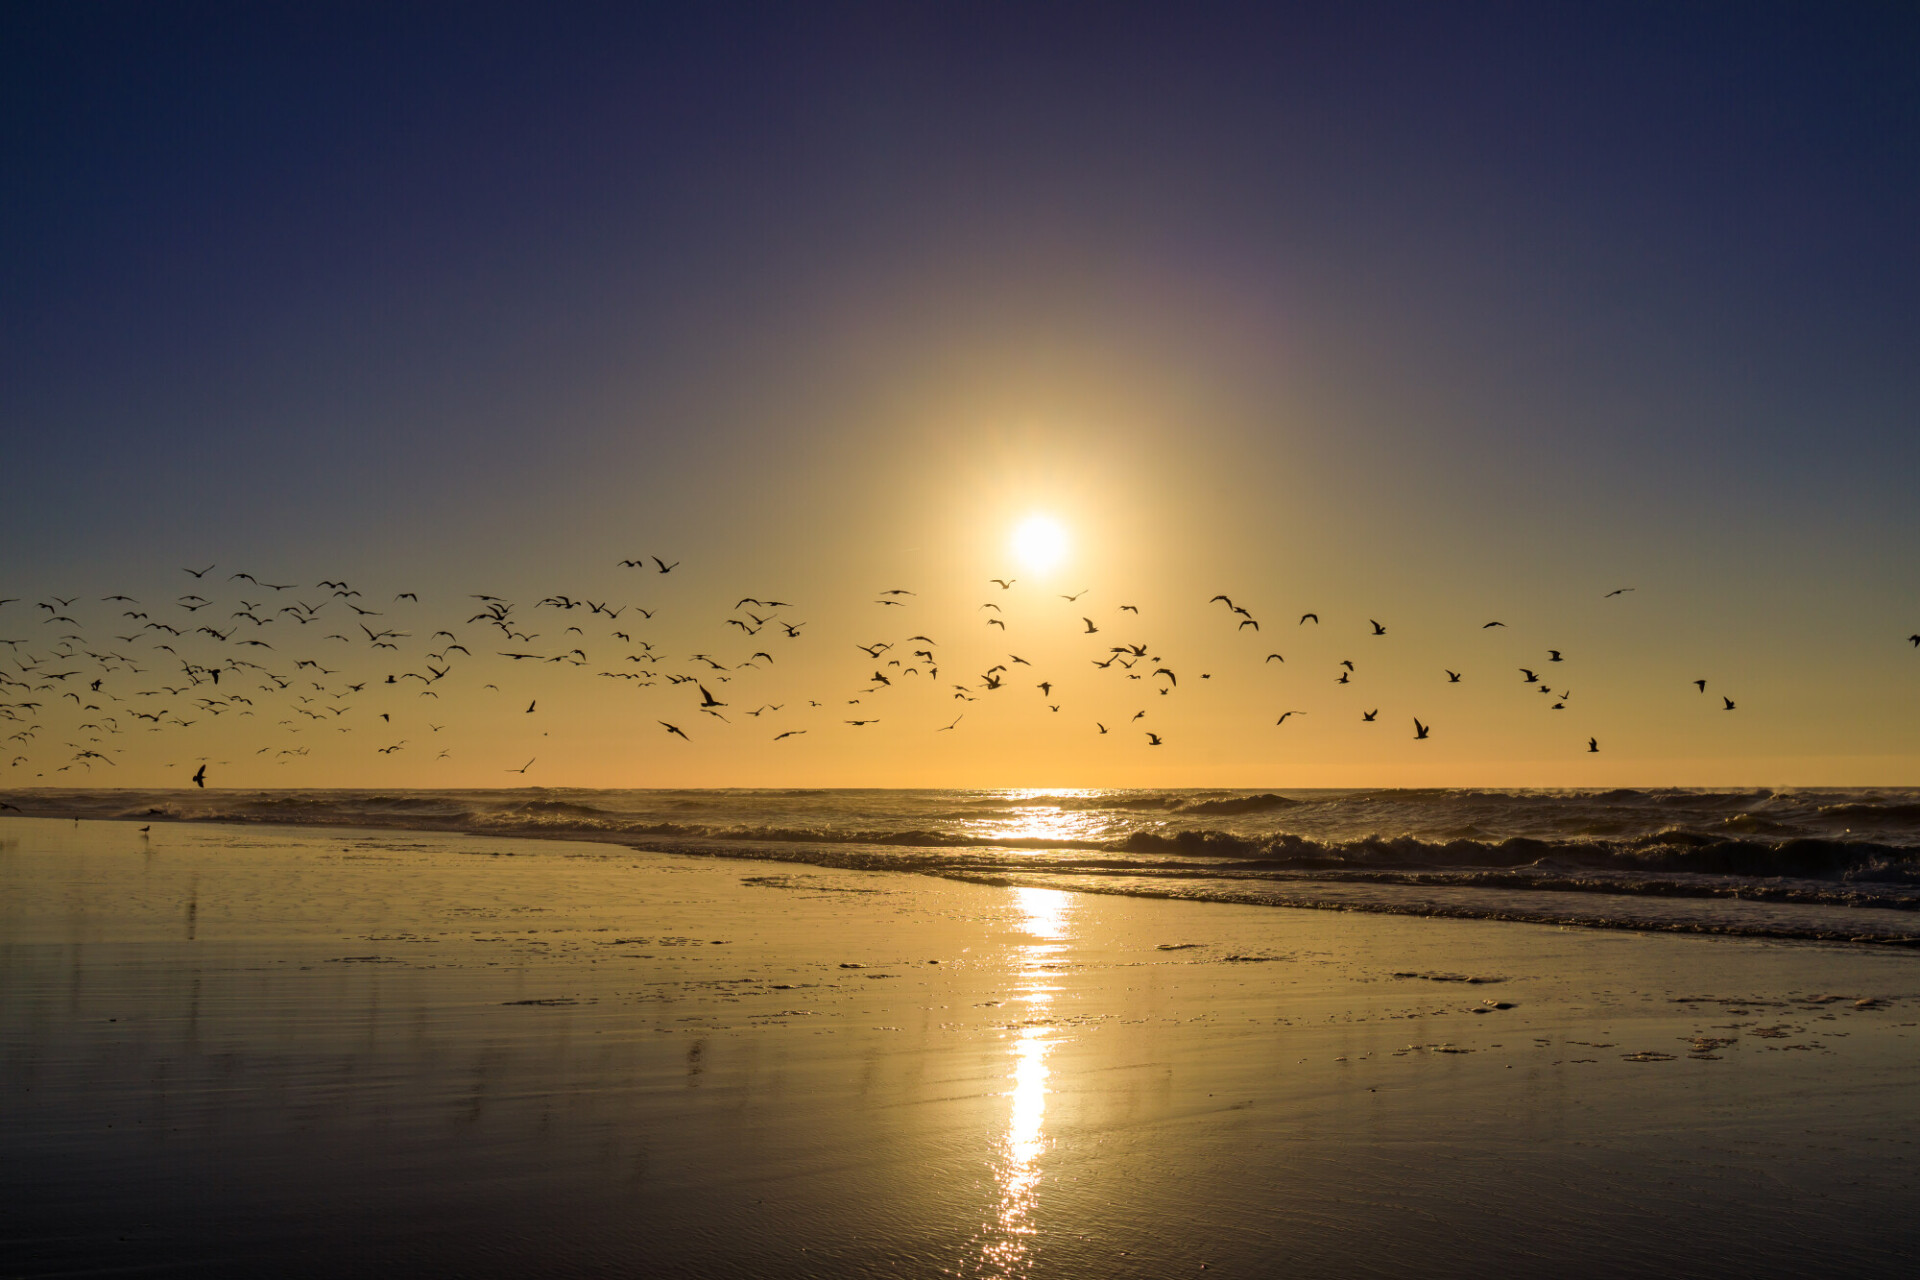 Sunset at the atlantic ocean in Portugal, Nazare and seagulls flying